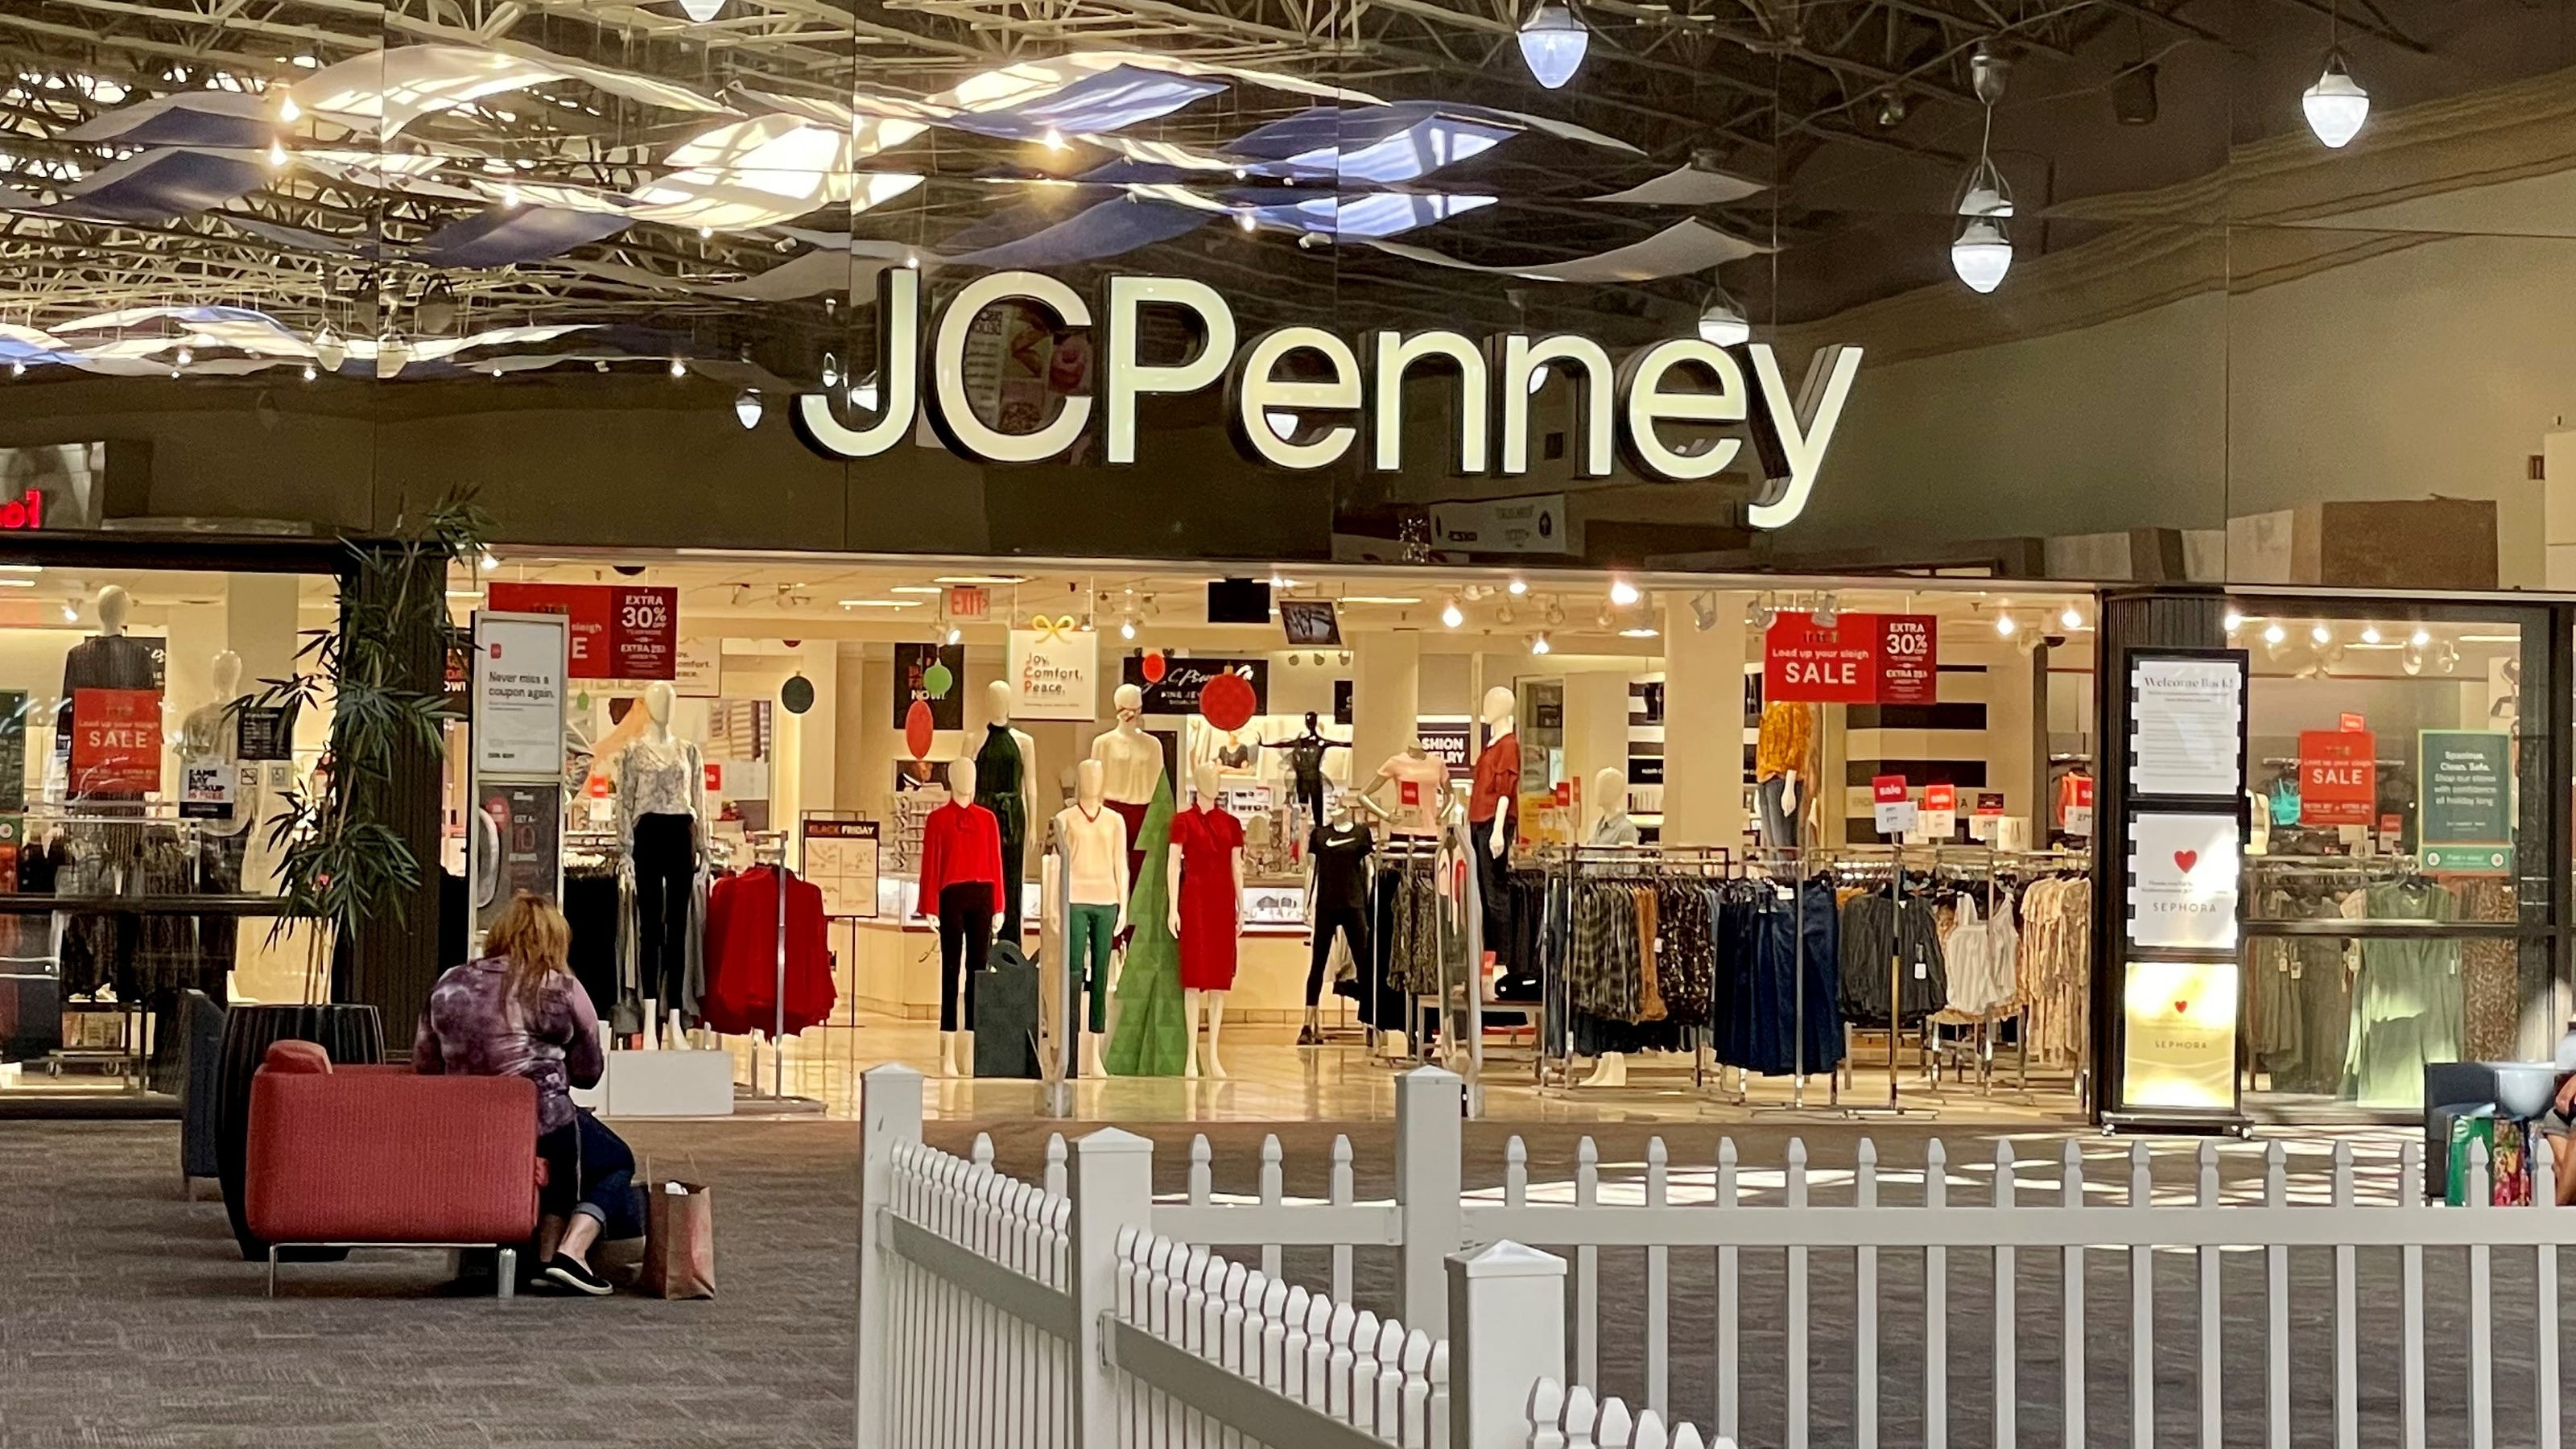 jcpenney mattresses for sale